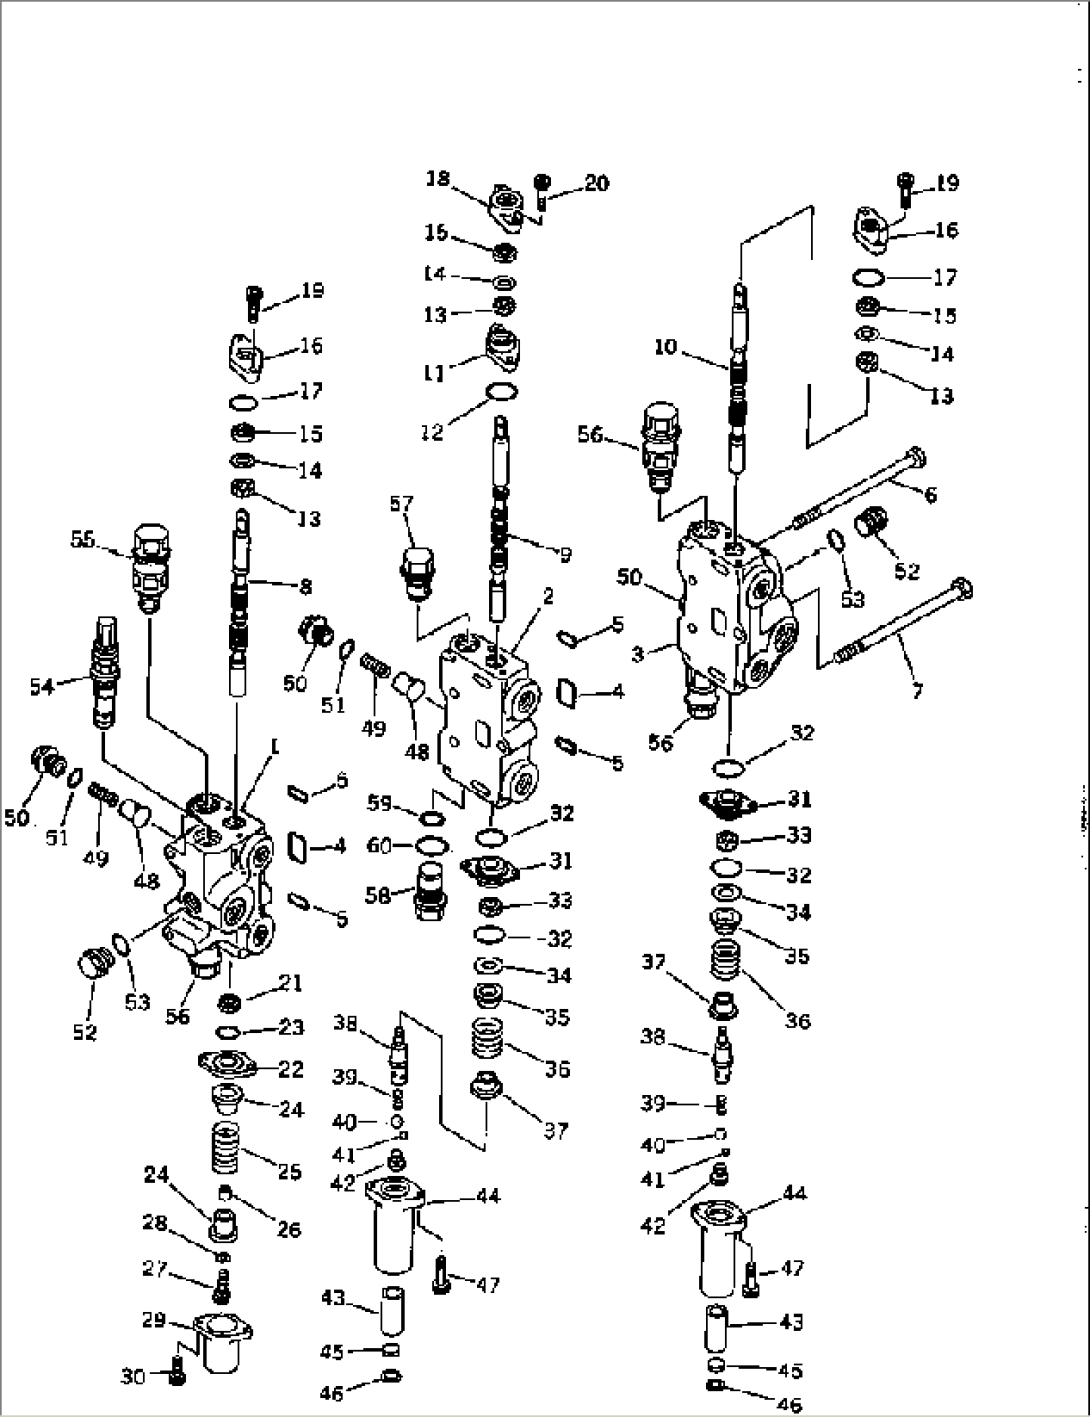 HYDRAULIC CONTROL VALVE (1/2) (FOR 3-POINT HITCH)